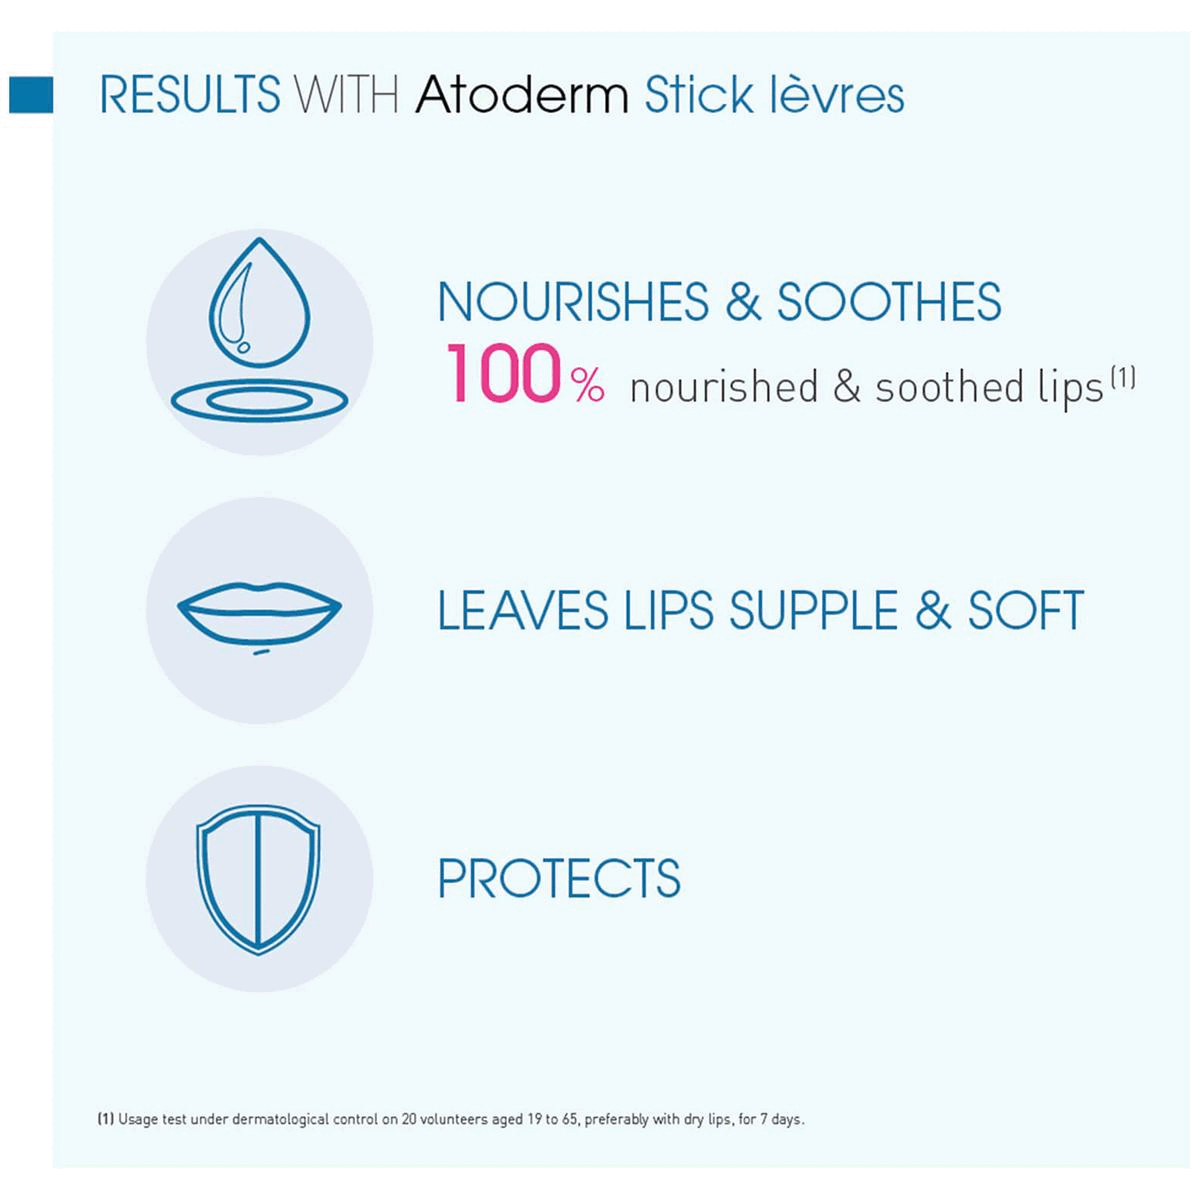 Results with atoderm stick levres. Your routine with atoderm stick levres.